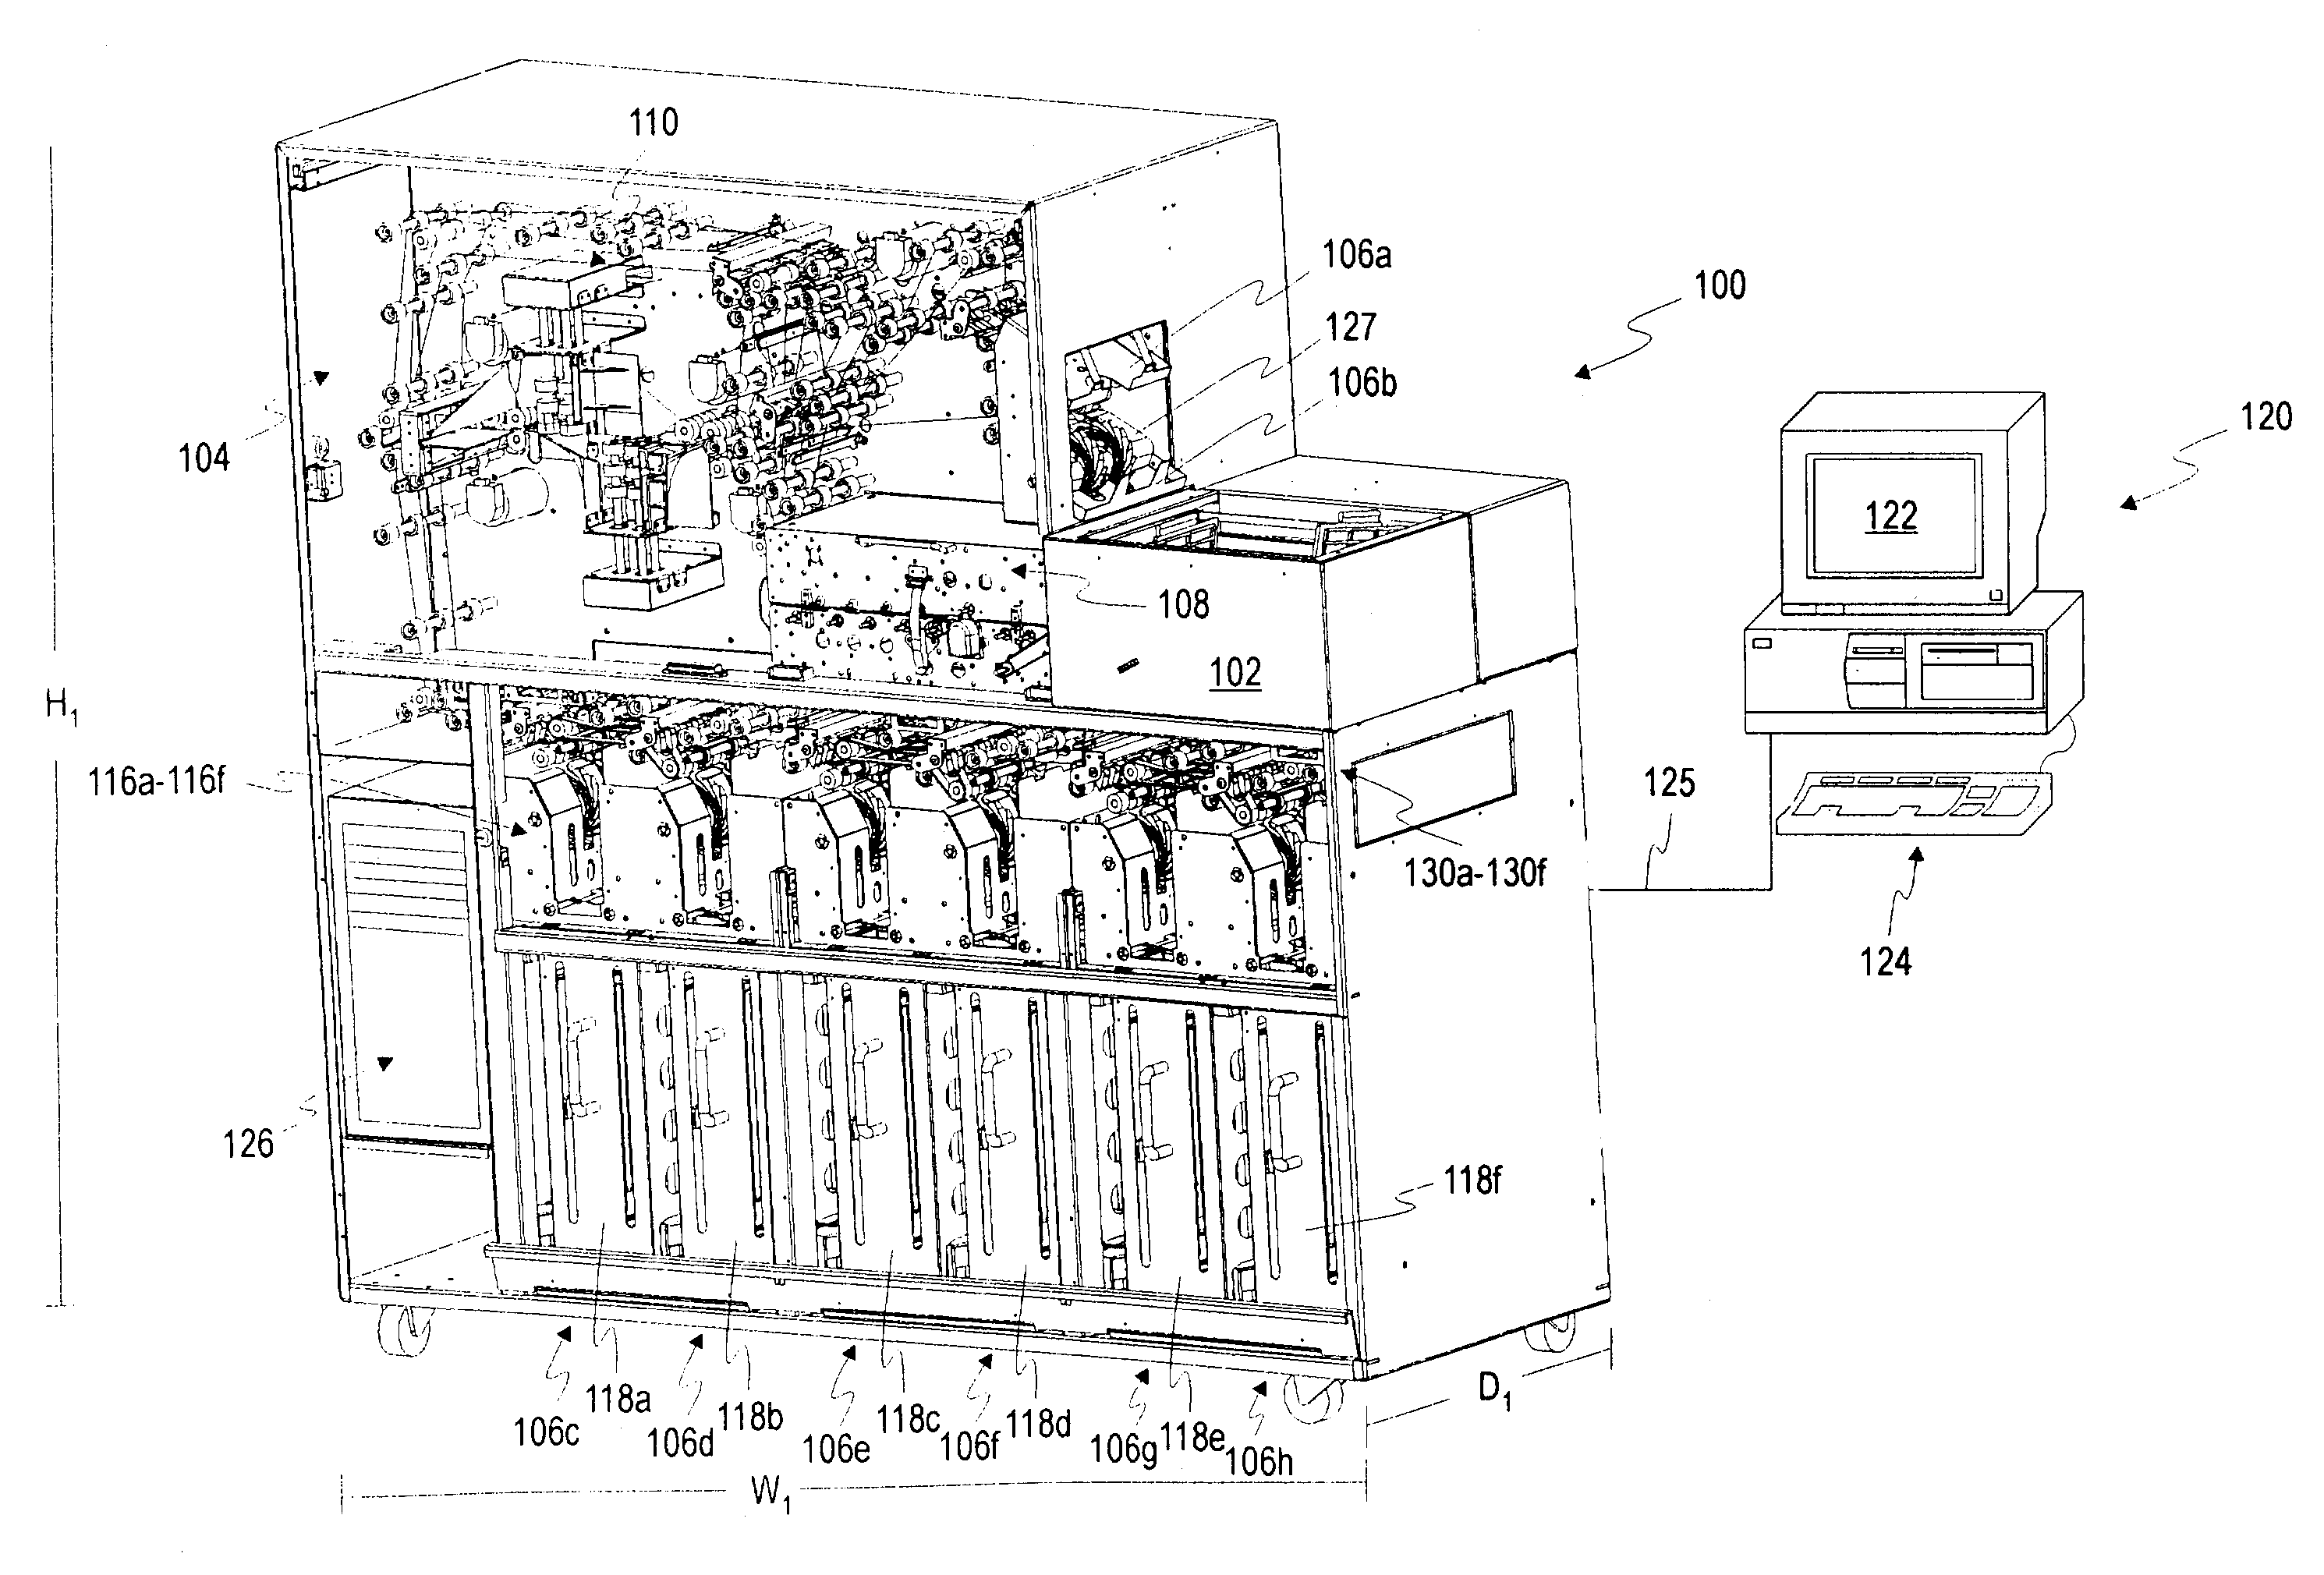 Currency handling system having multiple output receptacles